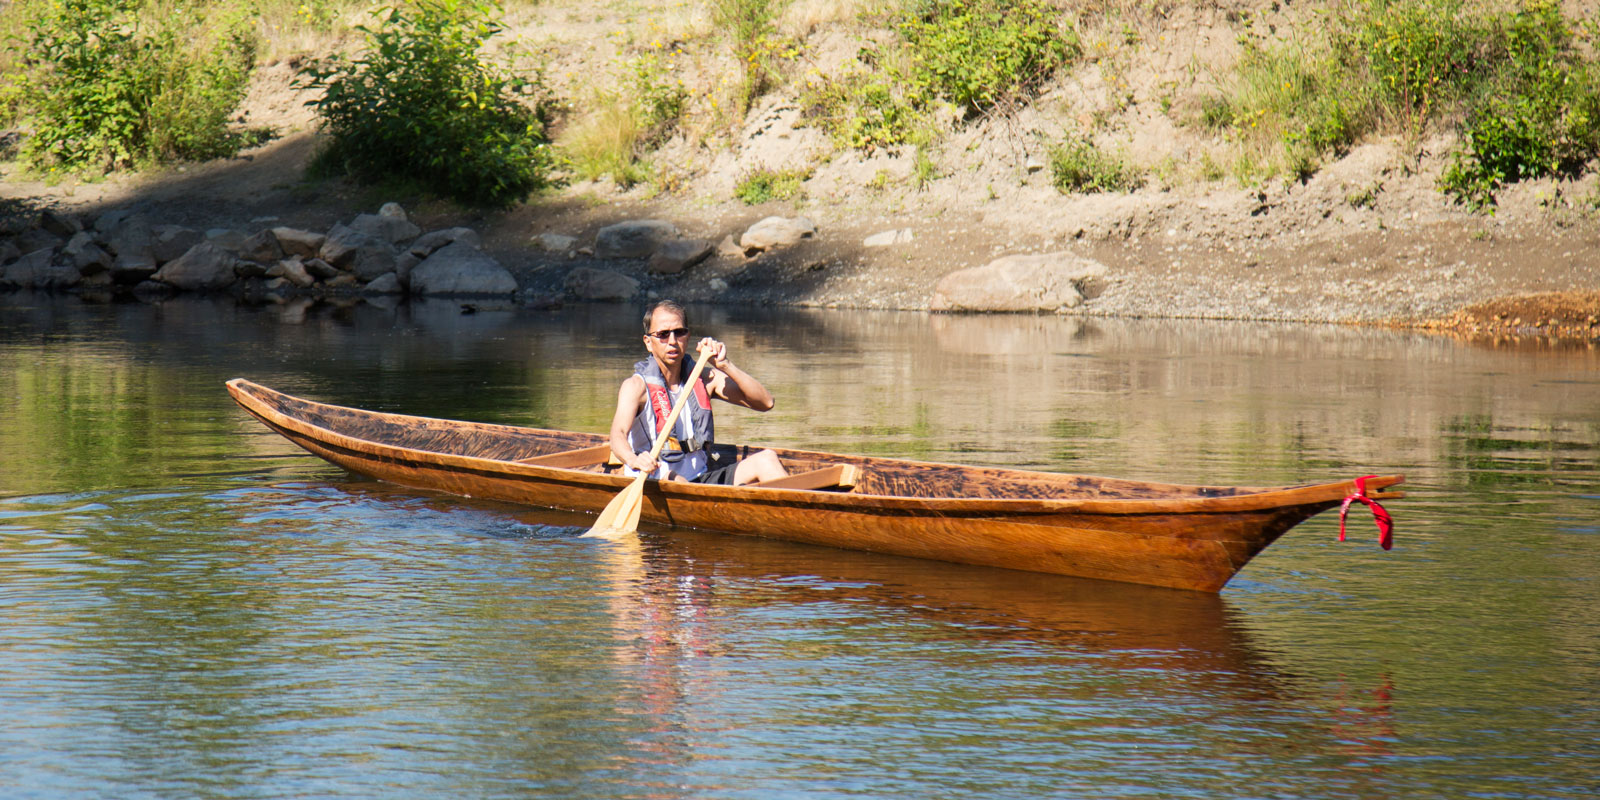 a man paddles the canoe in the green river